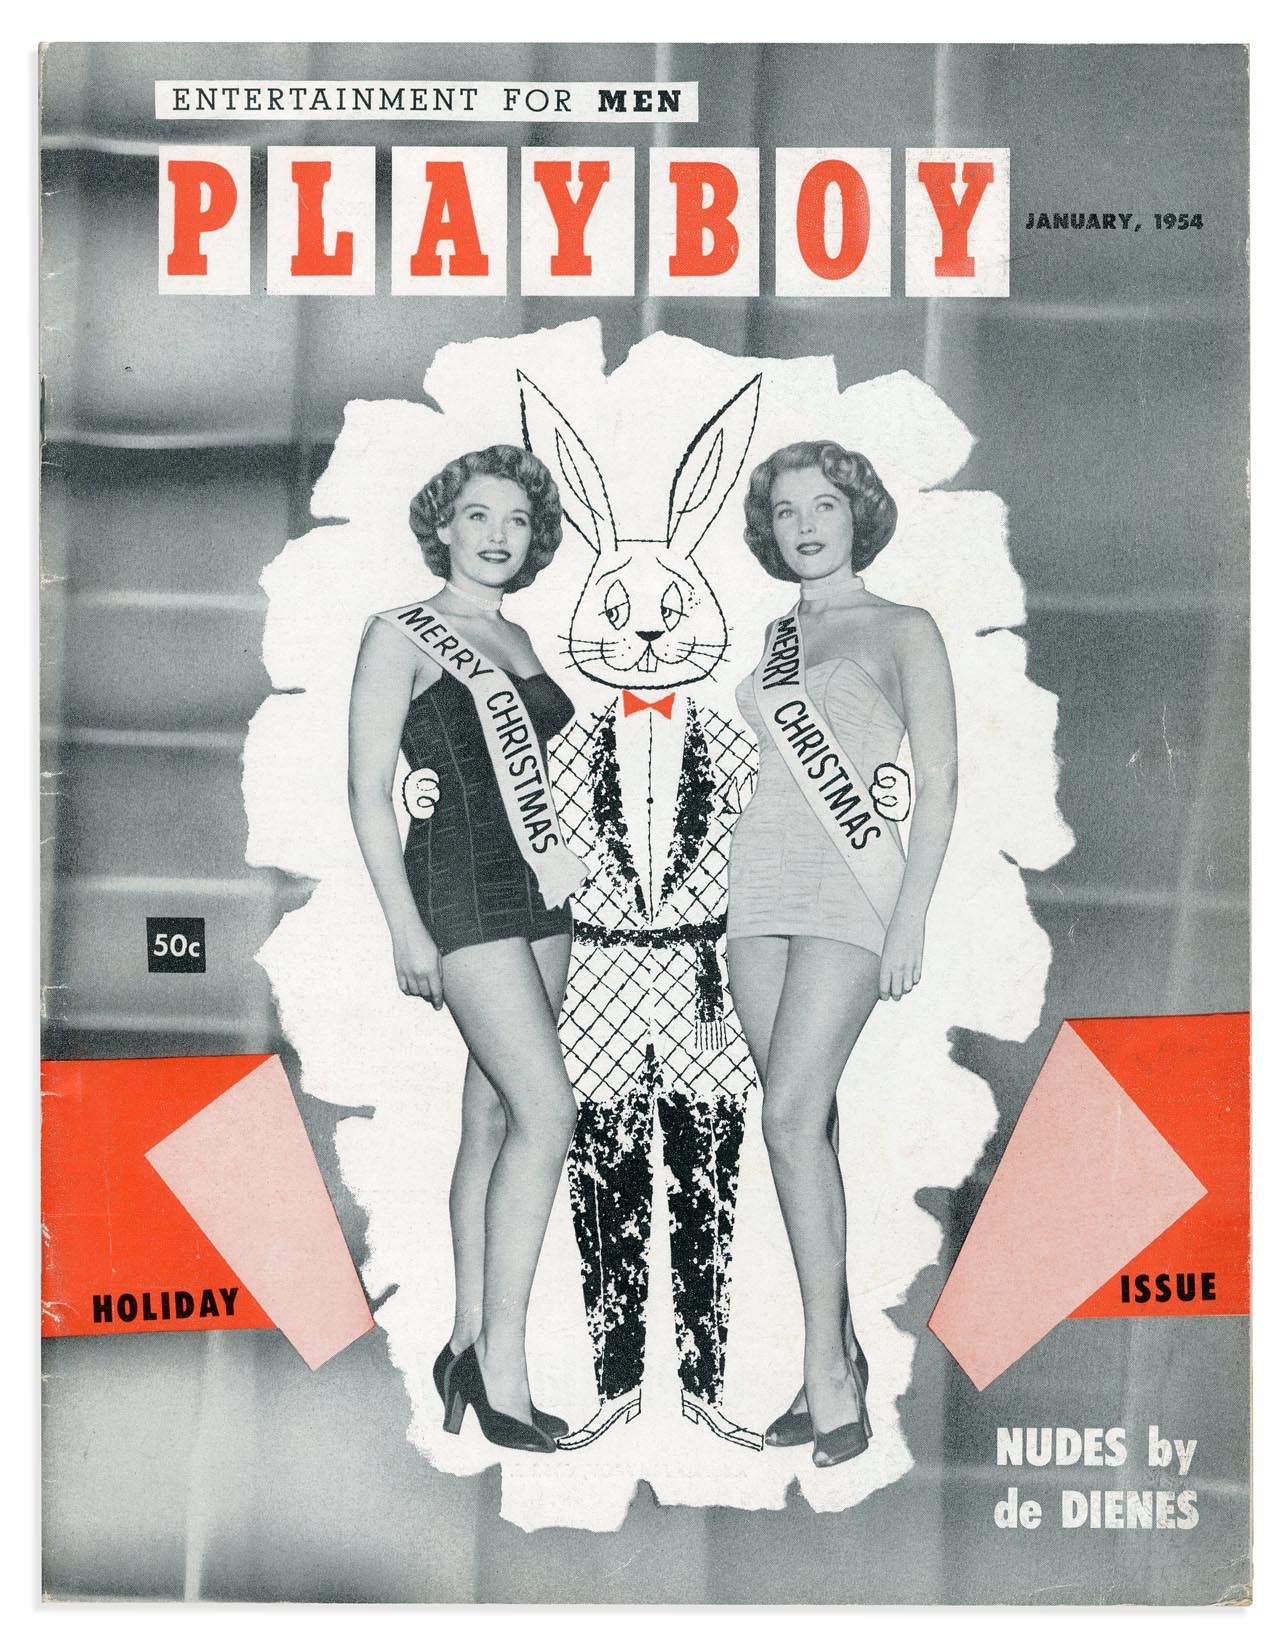 Rock And Pop Culture - 1954 Playboy Magazine #2 - The Toughest of All